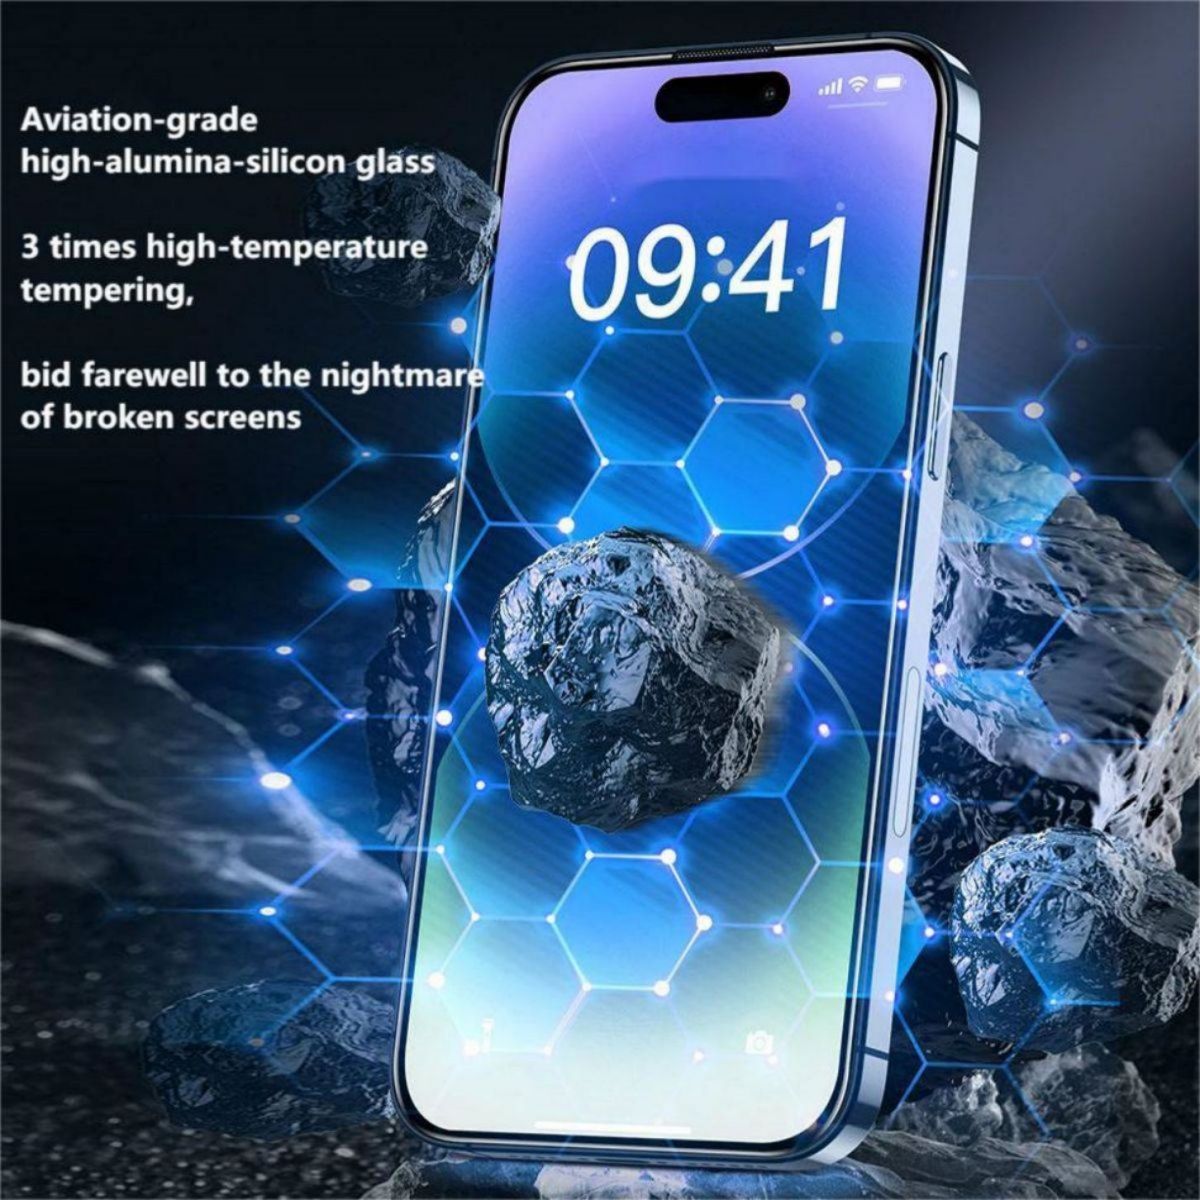 WEKOME 9D Gurved Privacy Tempered Glass Screen Protector WTP-067 - Hugmie